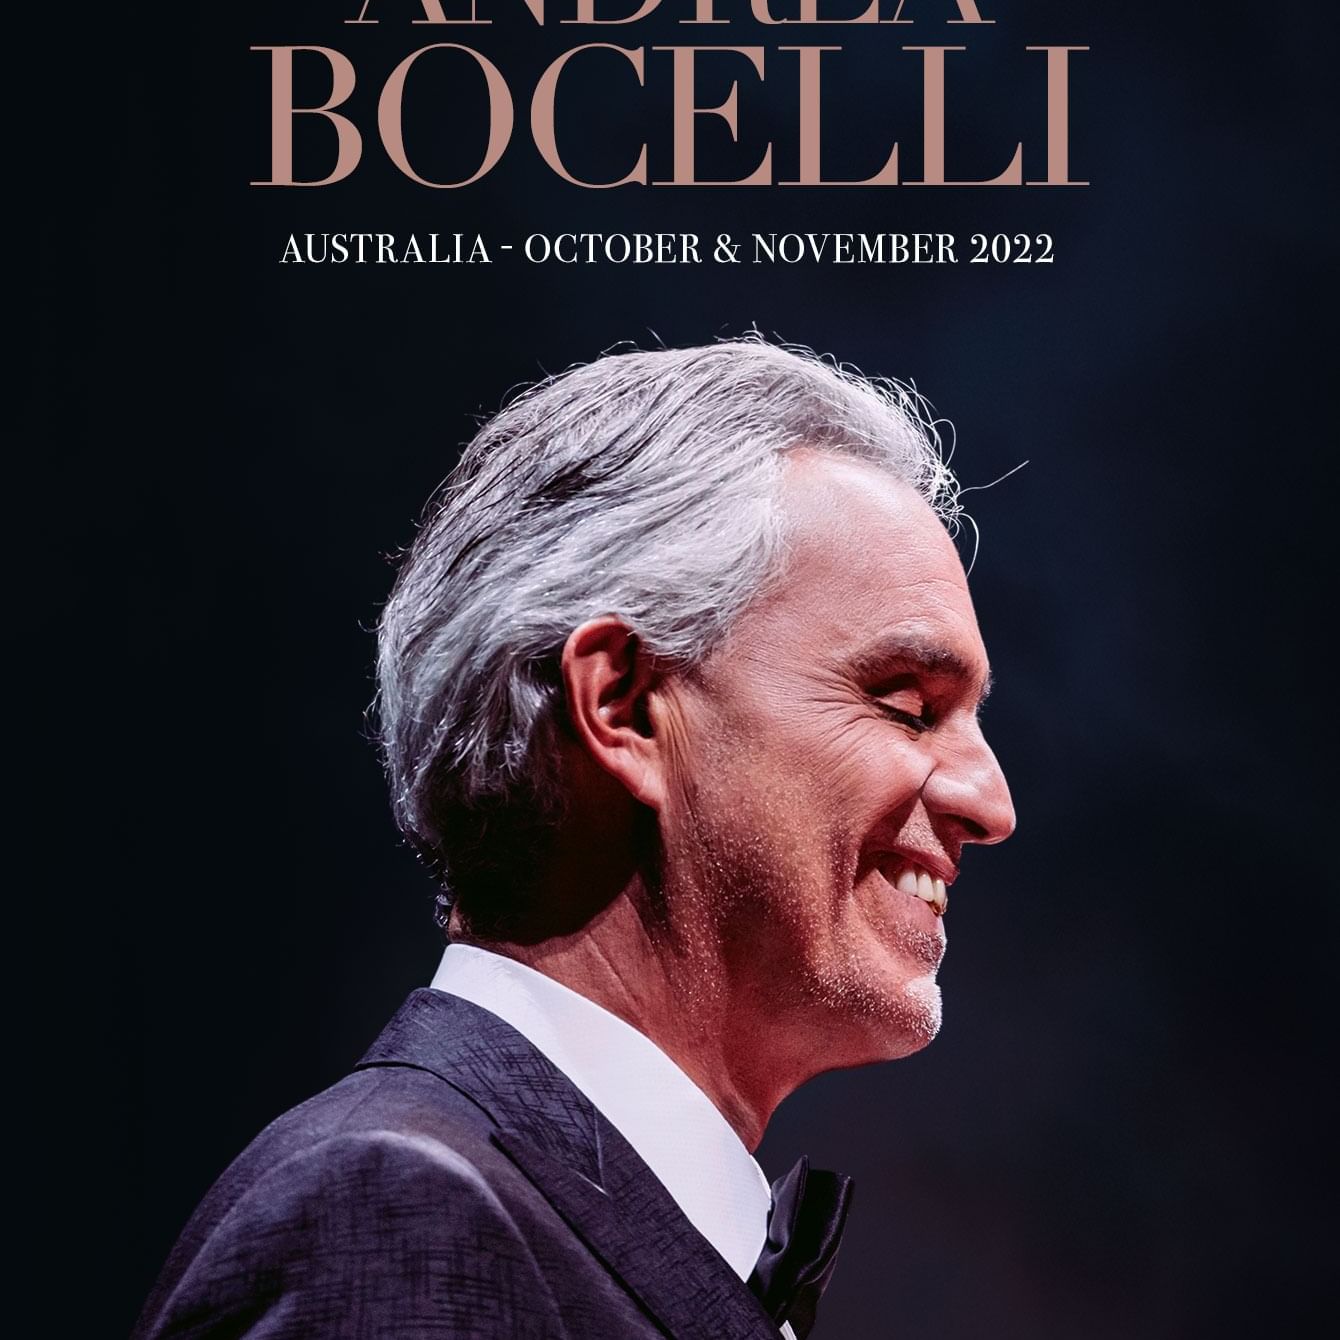 Andrea Bocelli on stage